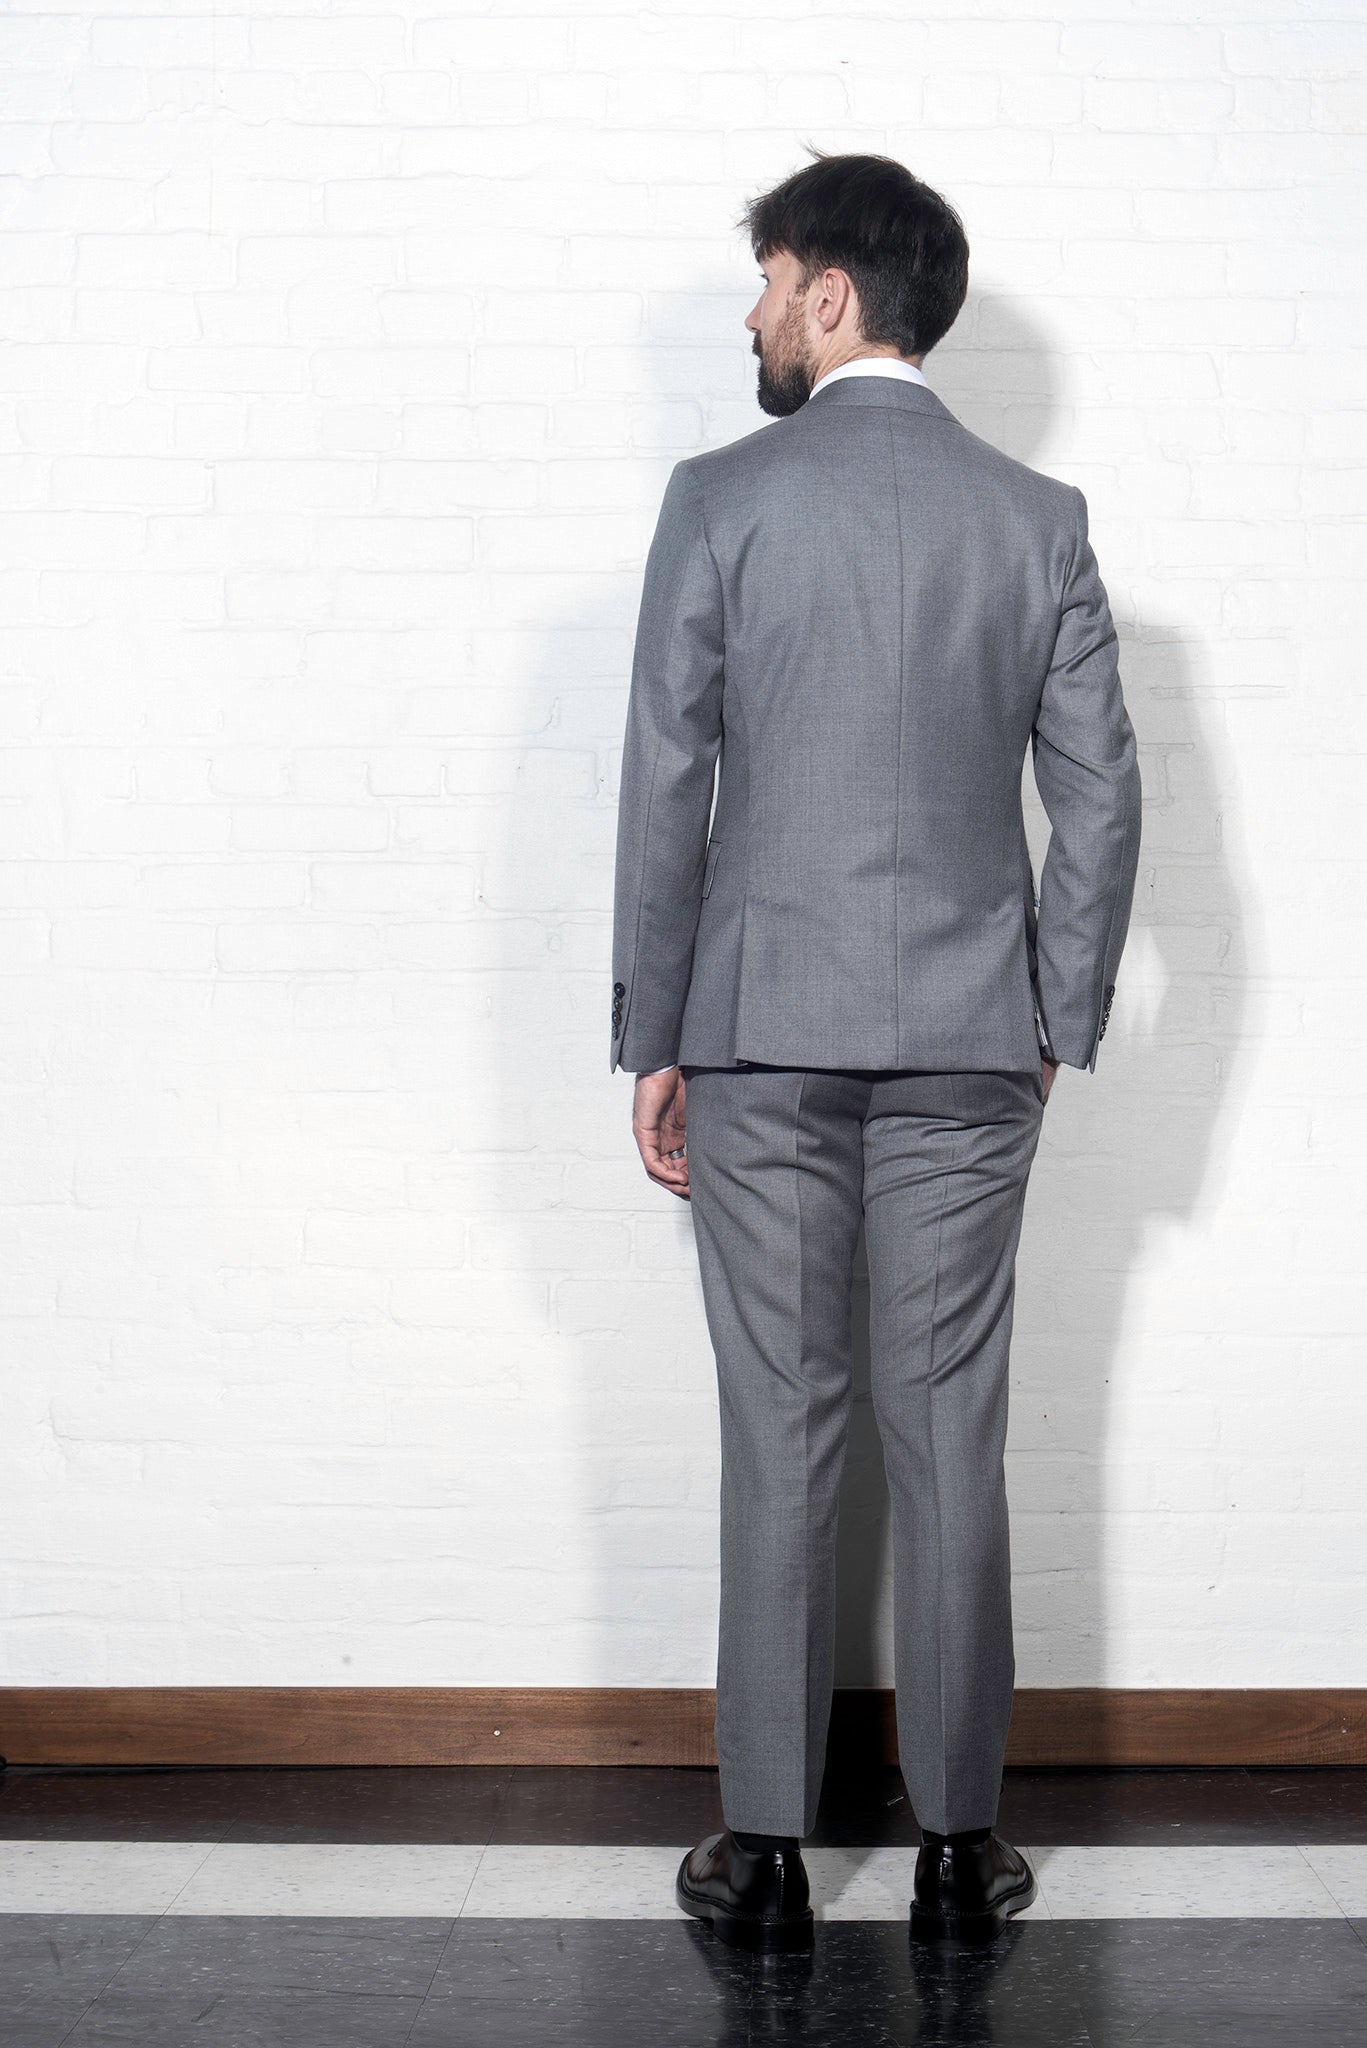 Brooklyn Tailors BKT50 Tailored Jacket in Super 110s Twill - Dove Gray on-body shot from the back. Model is wearing jacket with matching pants, white dress shirt, tie, and black belt. 